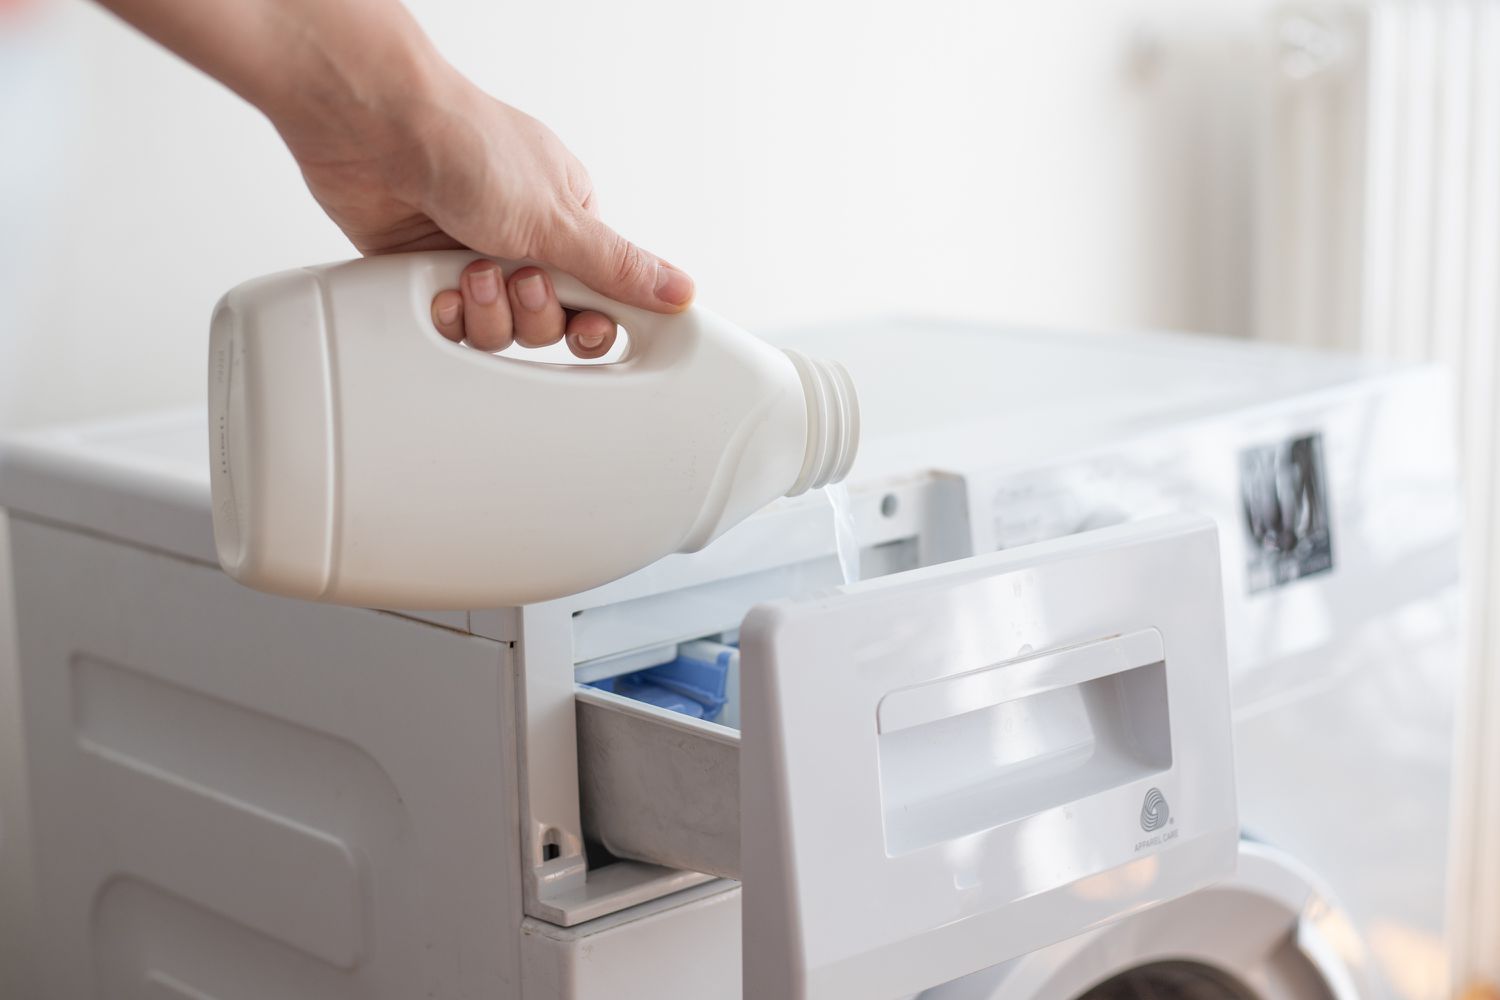 Chlorine bleach poured into washing machine dispenser to remove dye stains